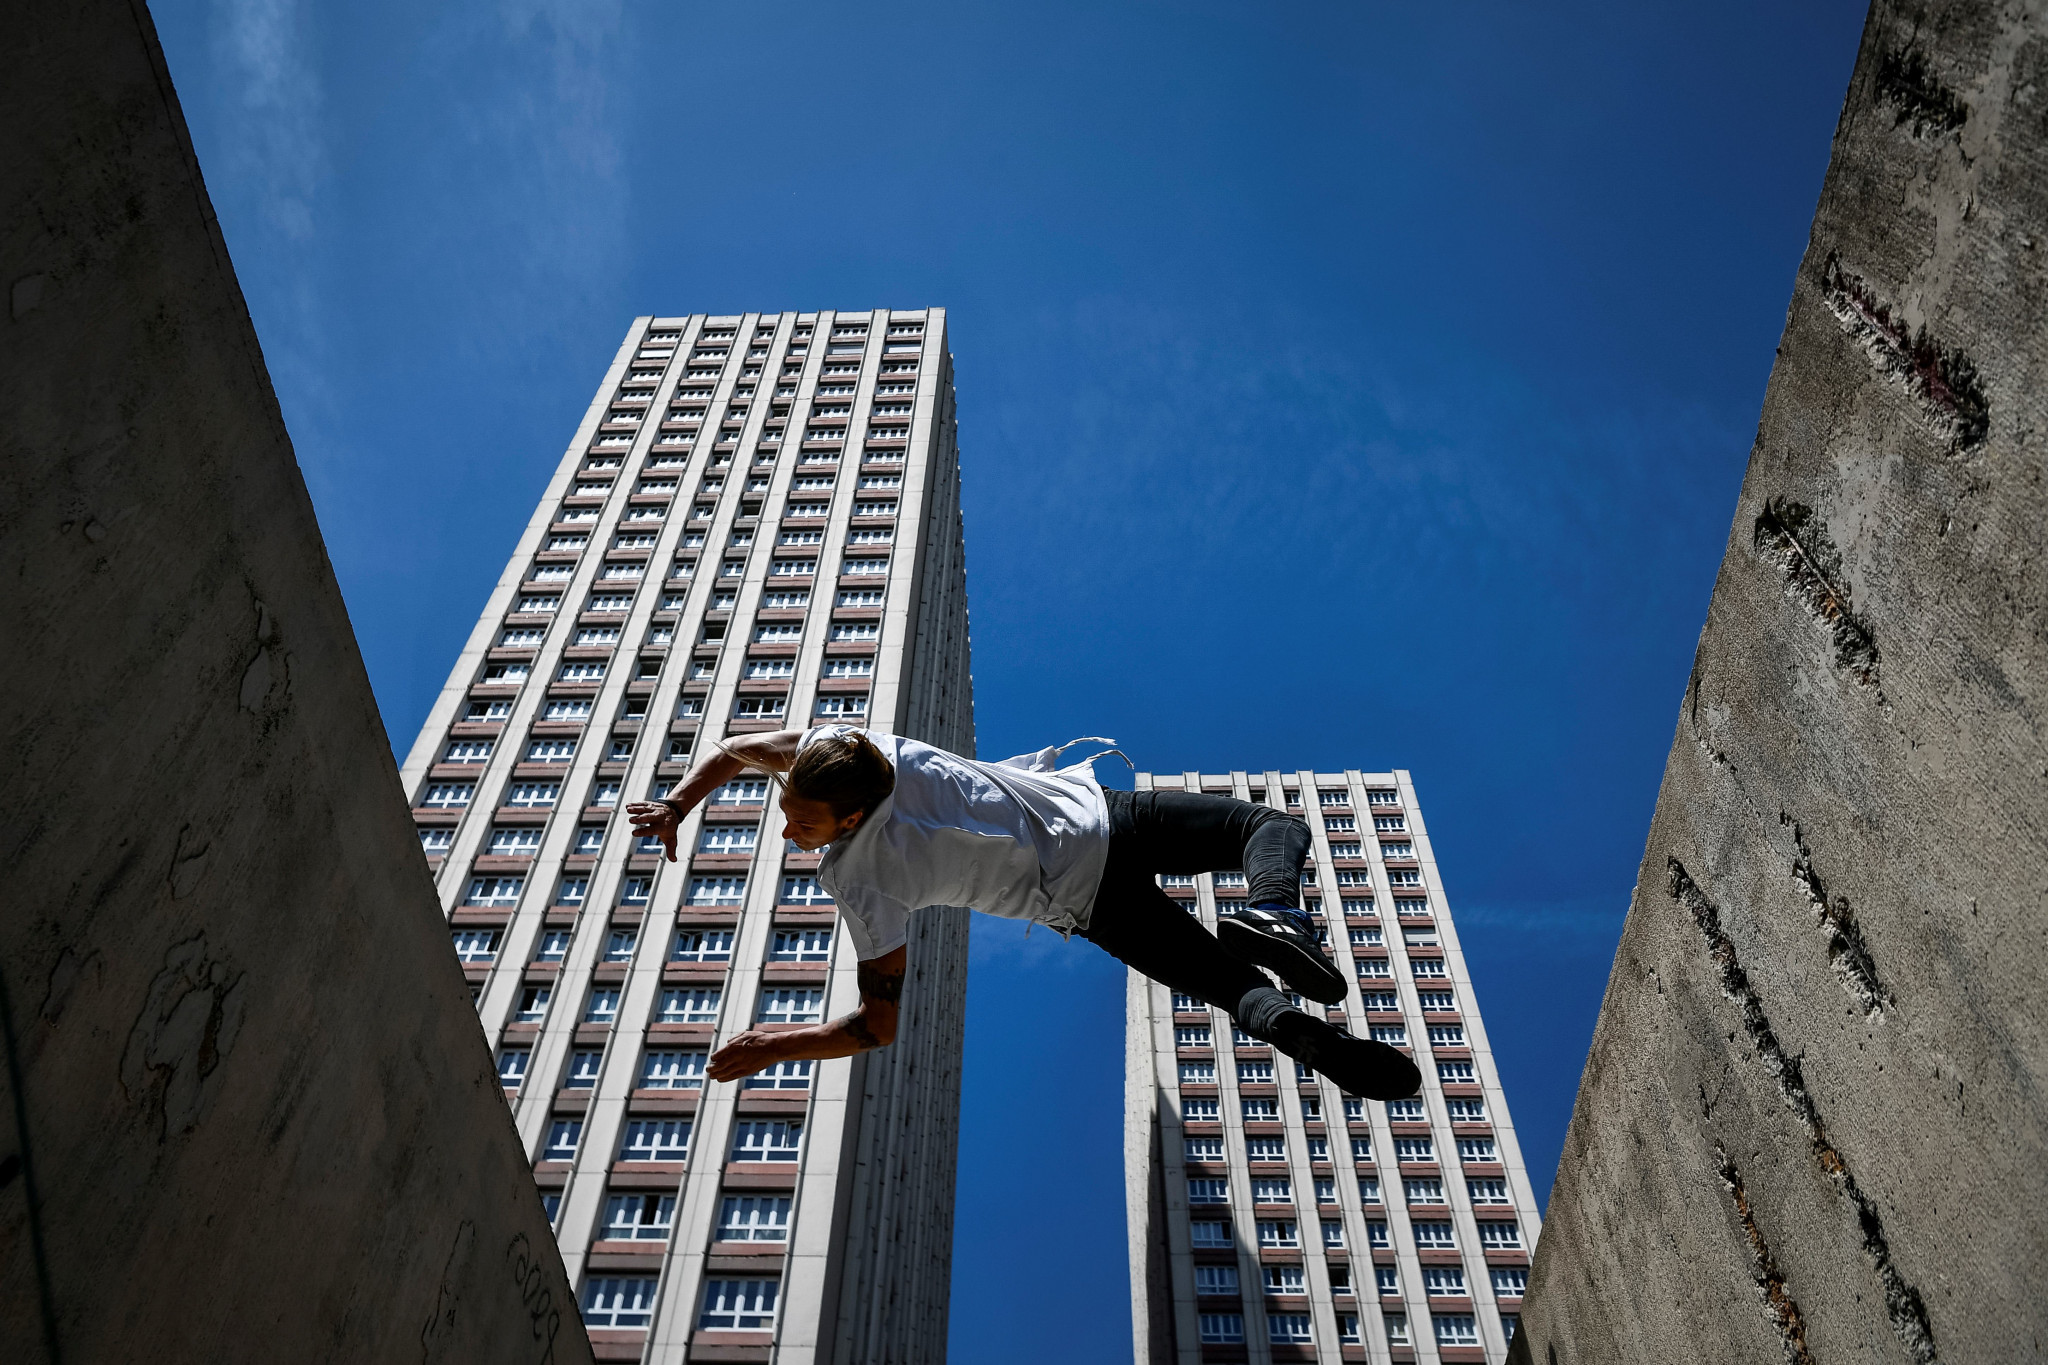 Last year's Parkour World Cup in Sofia will serve as the qualifying event for Birmingham 2022 ©Getty Images